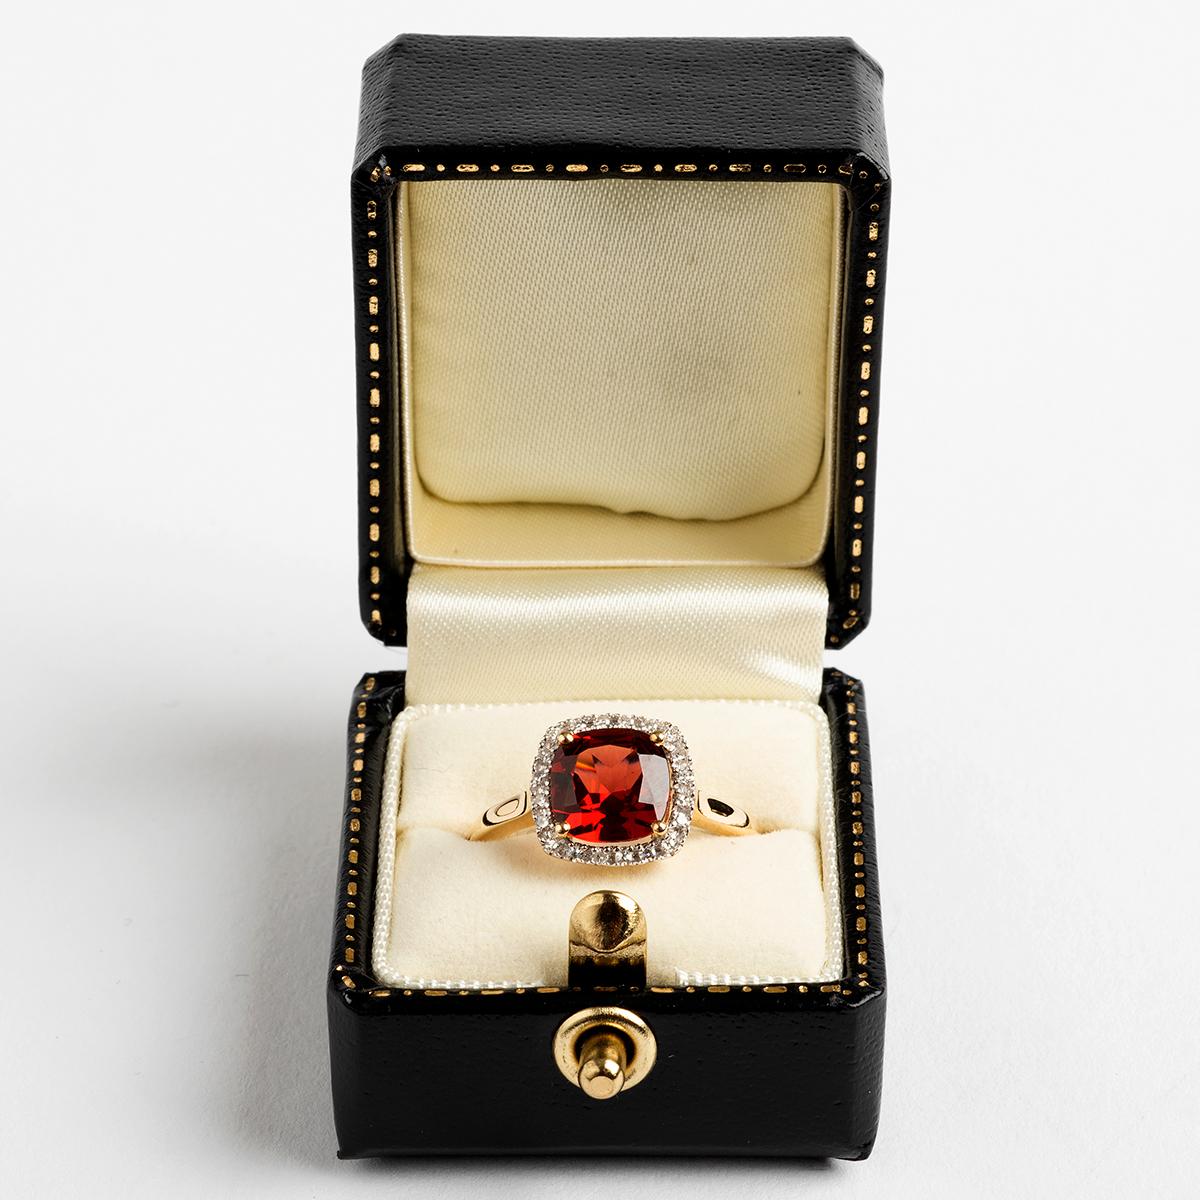 
Our very attractive cluster ring features a large cushion cut garnet (est. 2.05carat) surrounded by brilliant cut diamonds (est. .09carat). The band is 9k yellow gold and is size N. A statement piece in every sense.

A unique piece within our